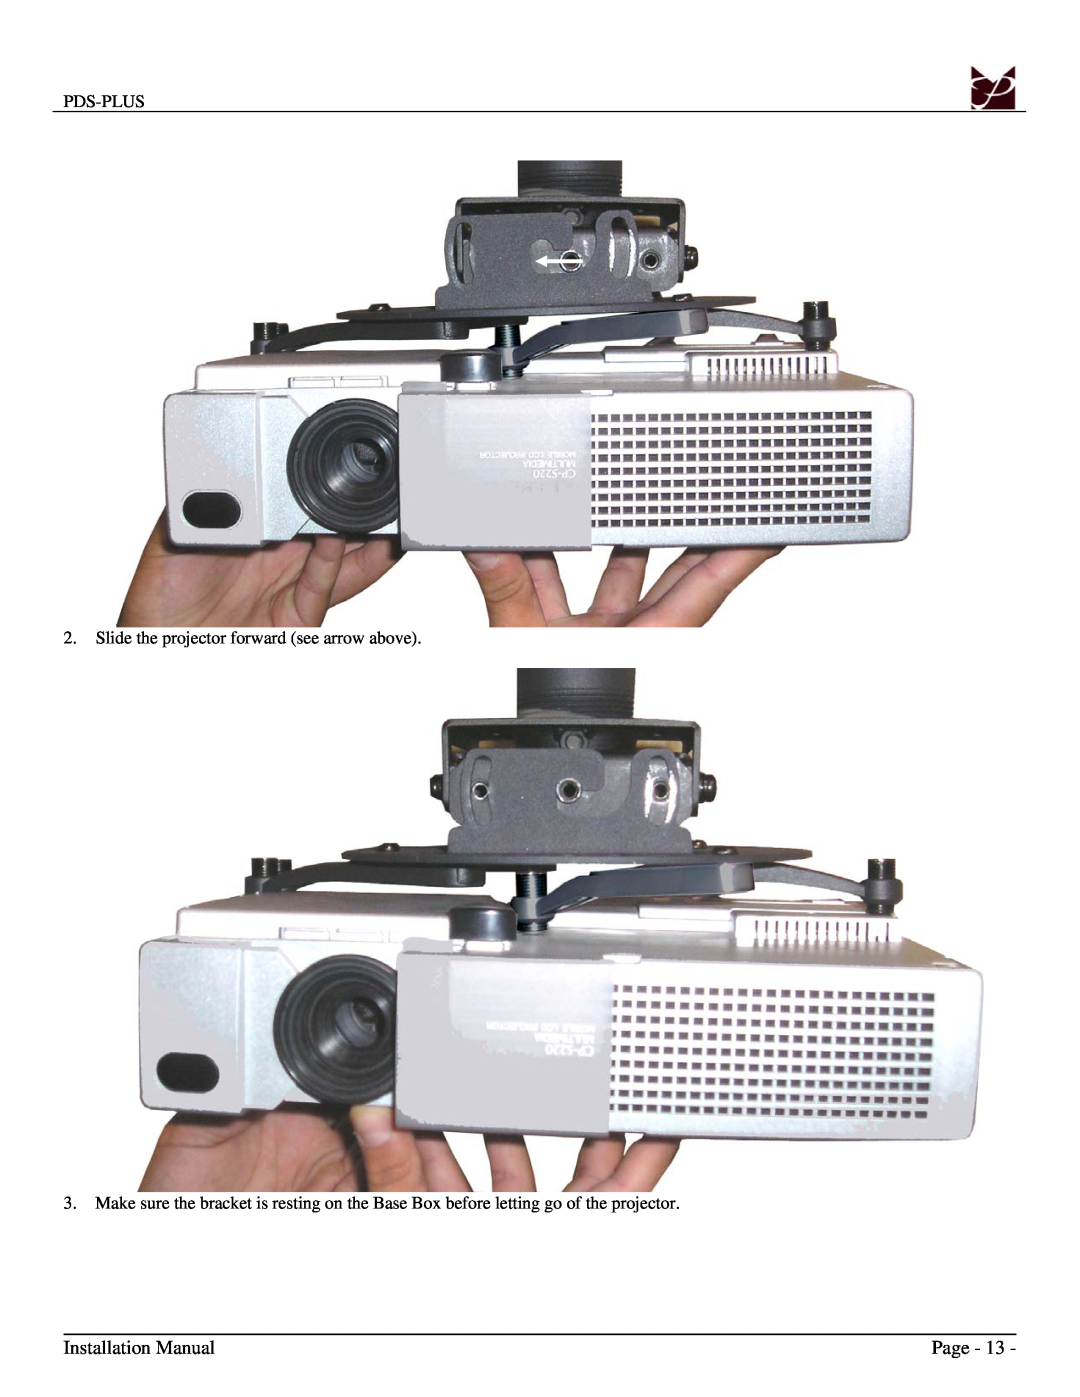 Premier Mounts PDS-PLUS Installation Manual, Page, Pds-Plus, Slide the projector forward see arrow above 